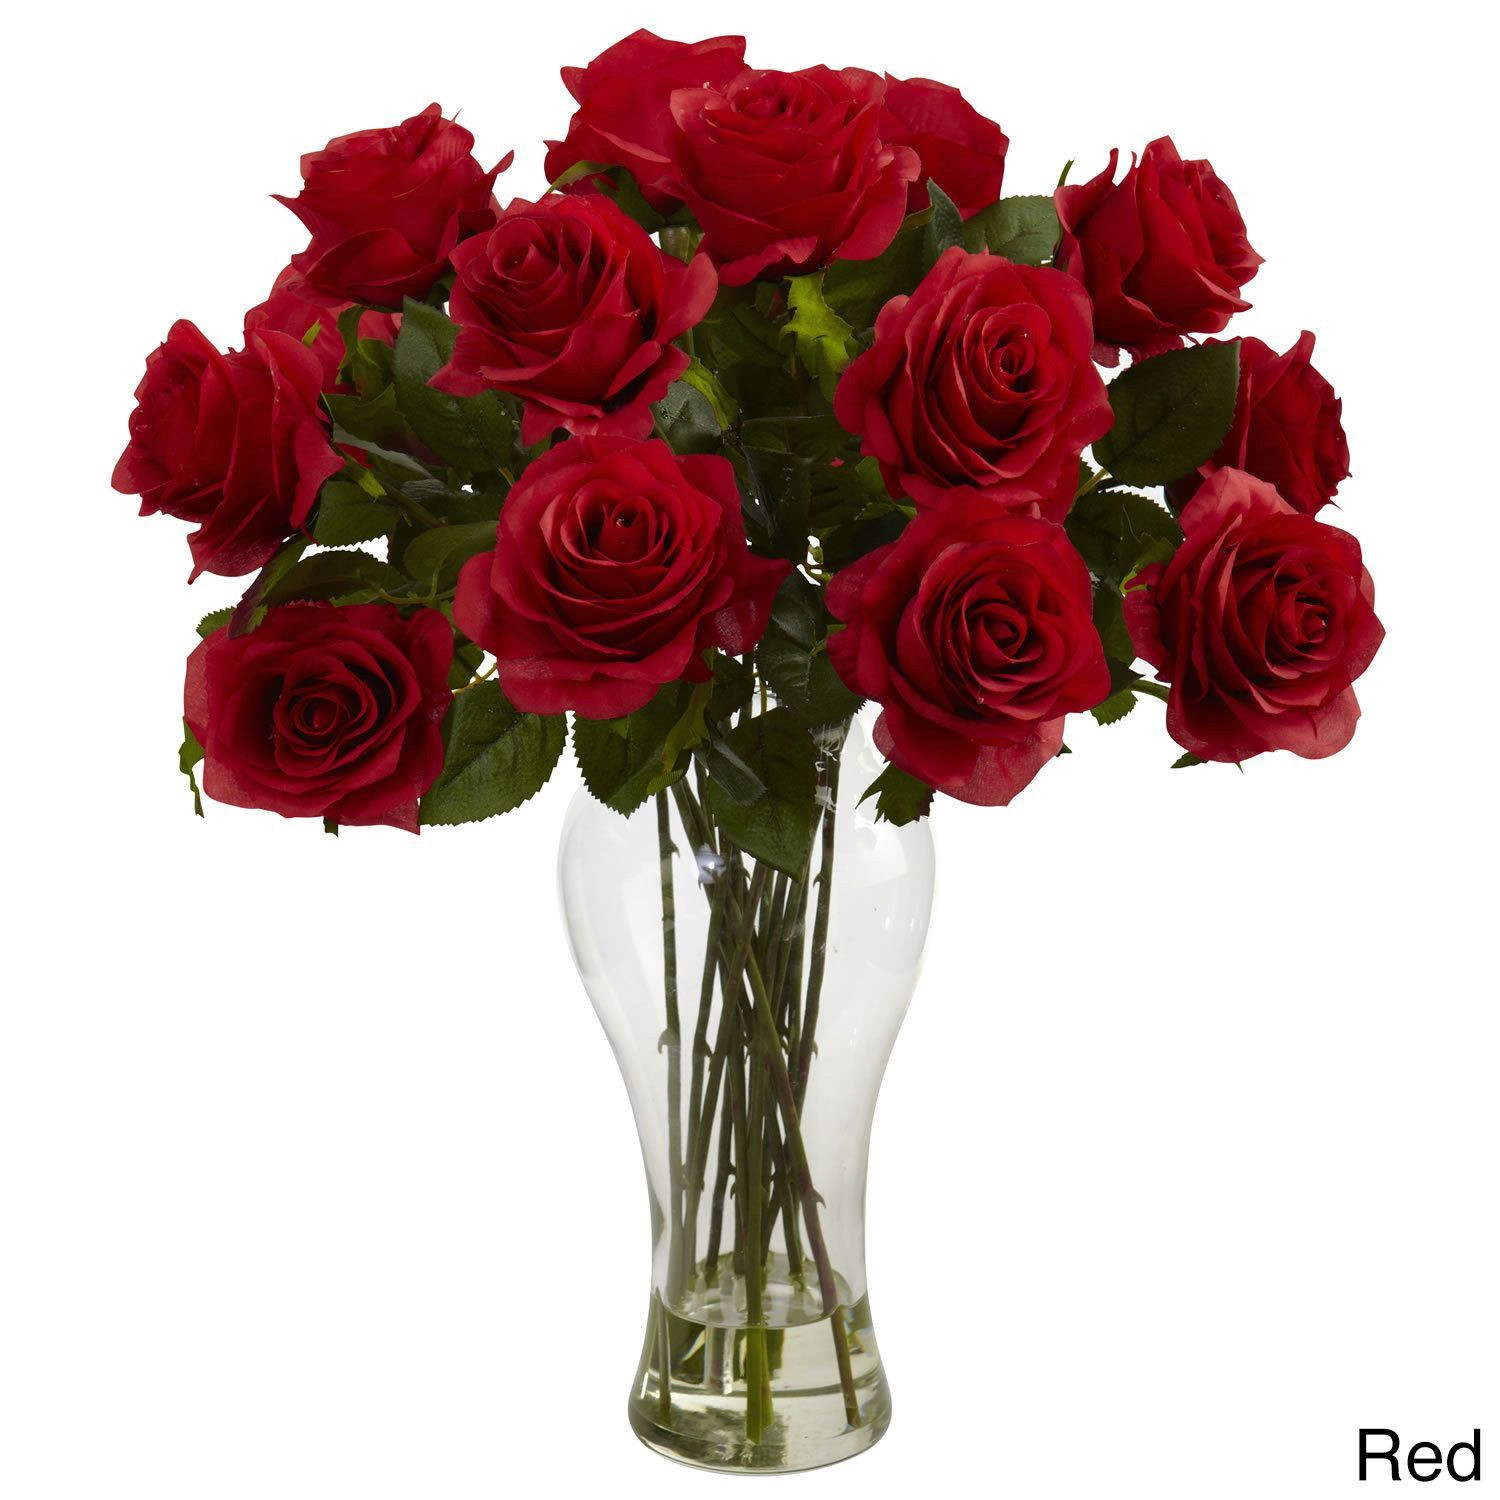 30 Stylish Artificial Flower Arrangements In Vases 2024 free download artificial flower arrangements in vases of nearly natural blooming roses vase blooming roses w vase red for nearly natural blooming roses vase blooming roses w vase red plastic